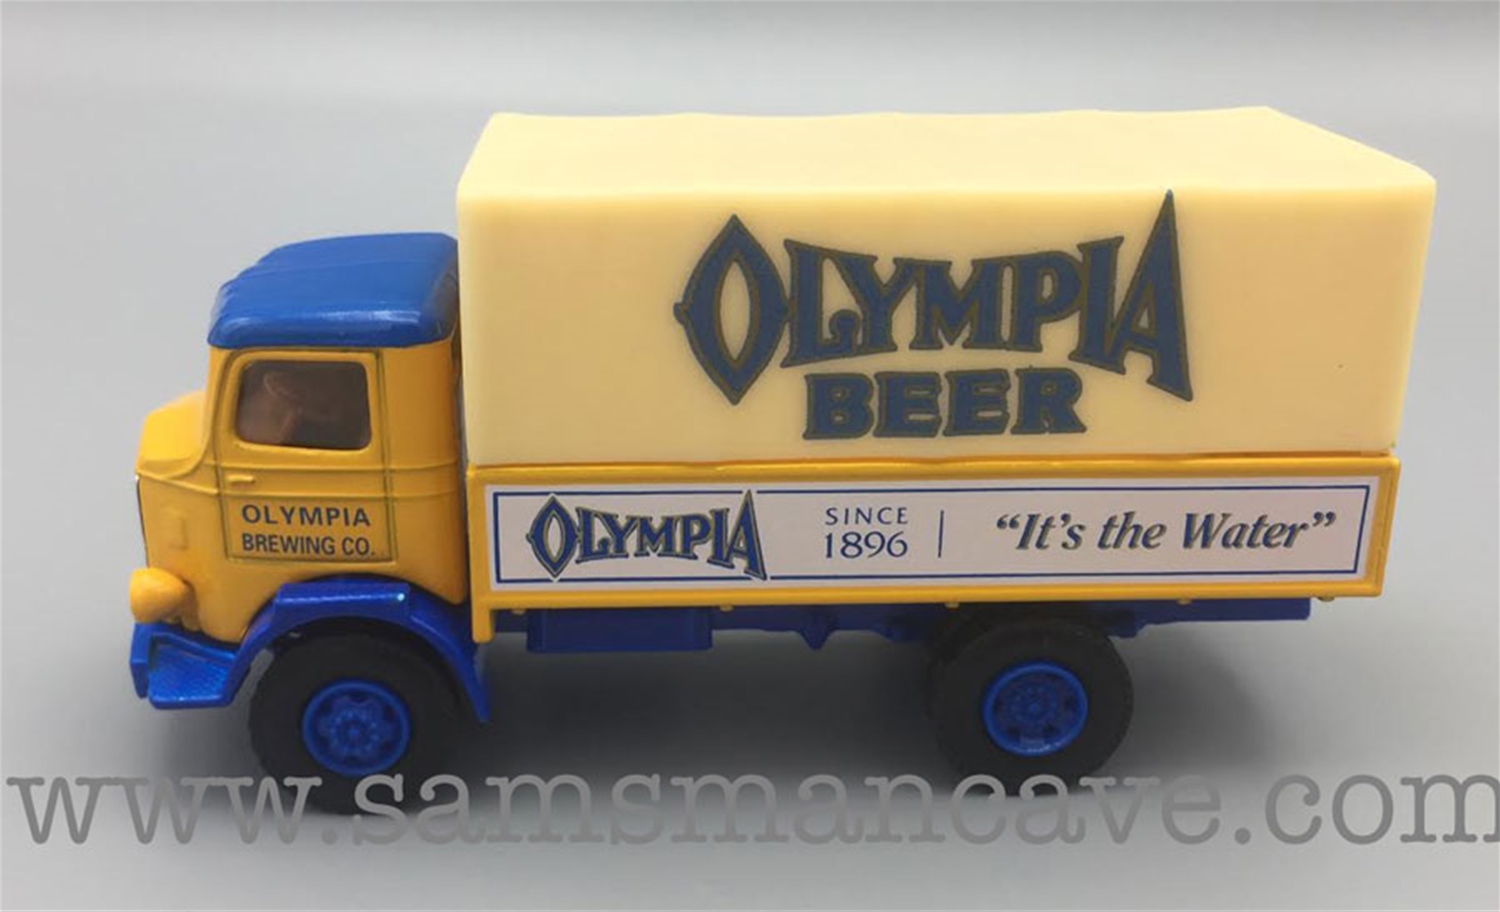 Olympia Beer Truck by AHL